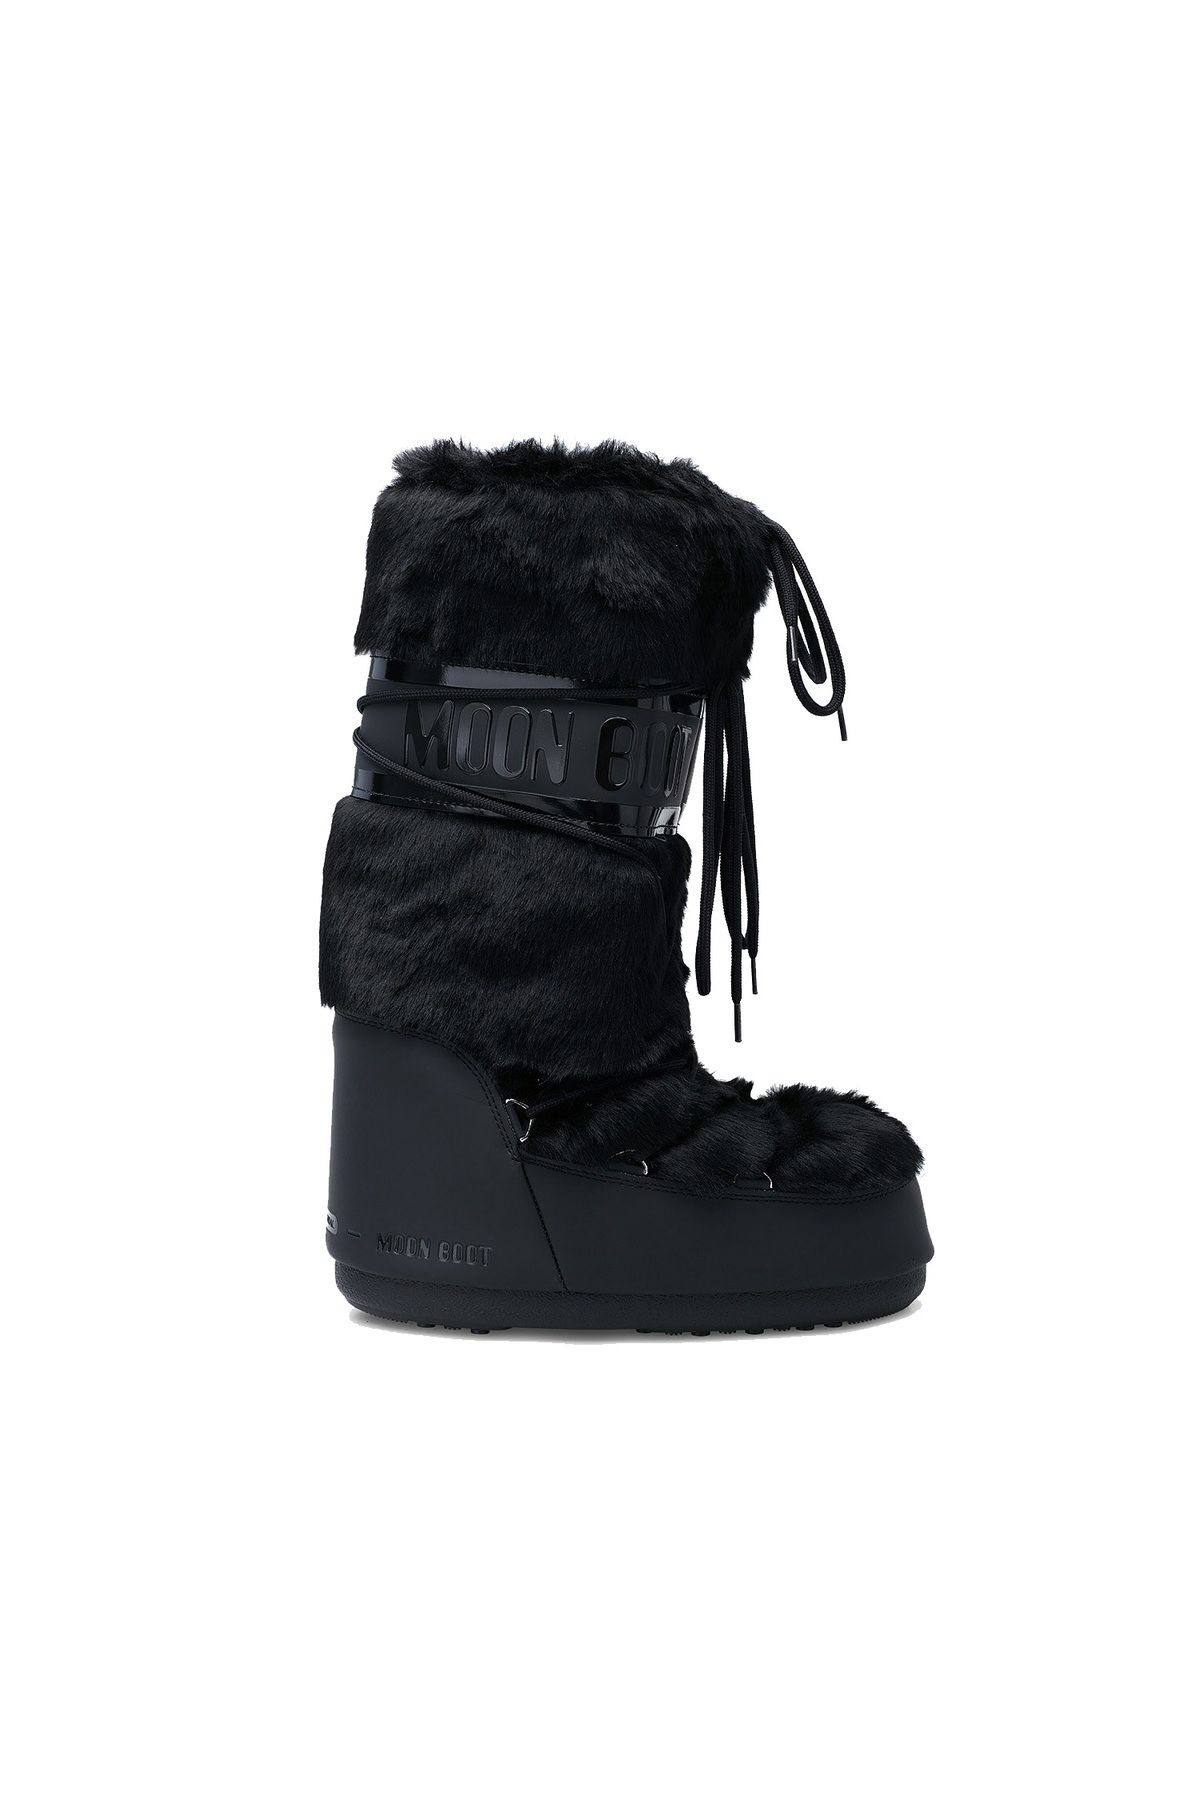 Moon Boot Mb Icon Faux Fur